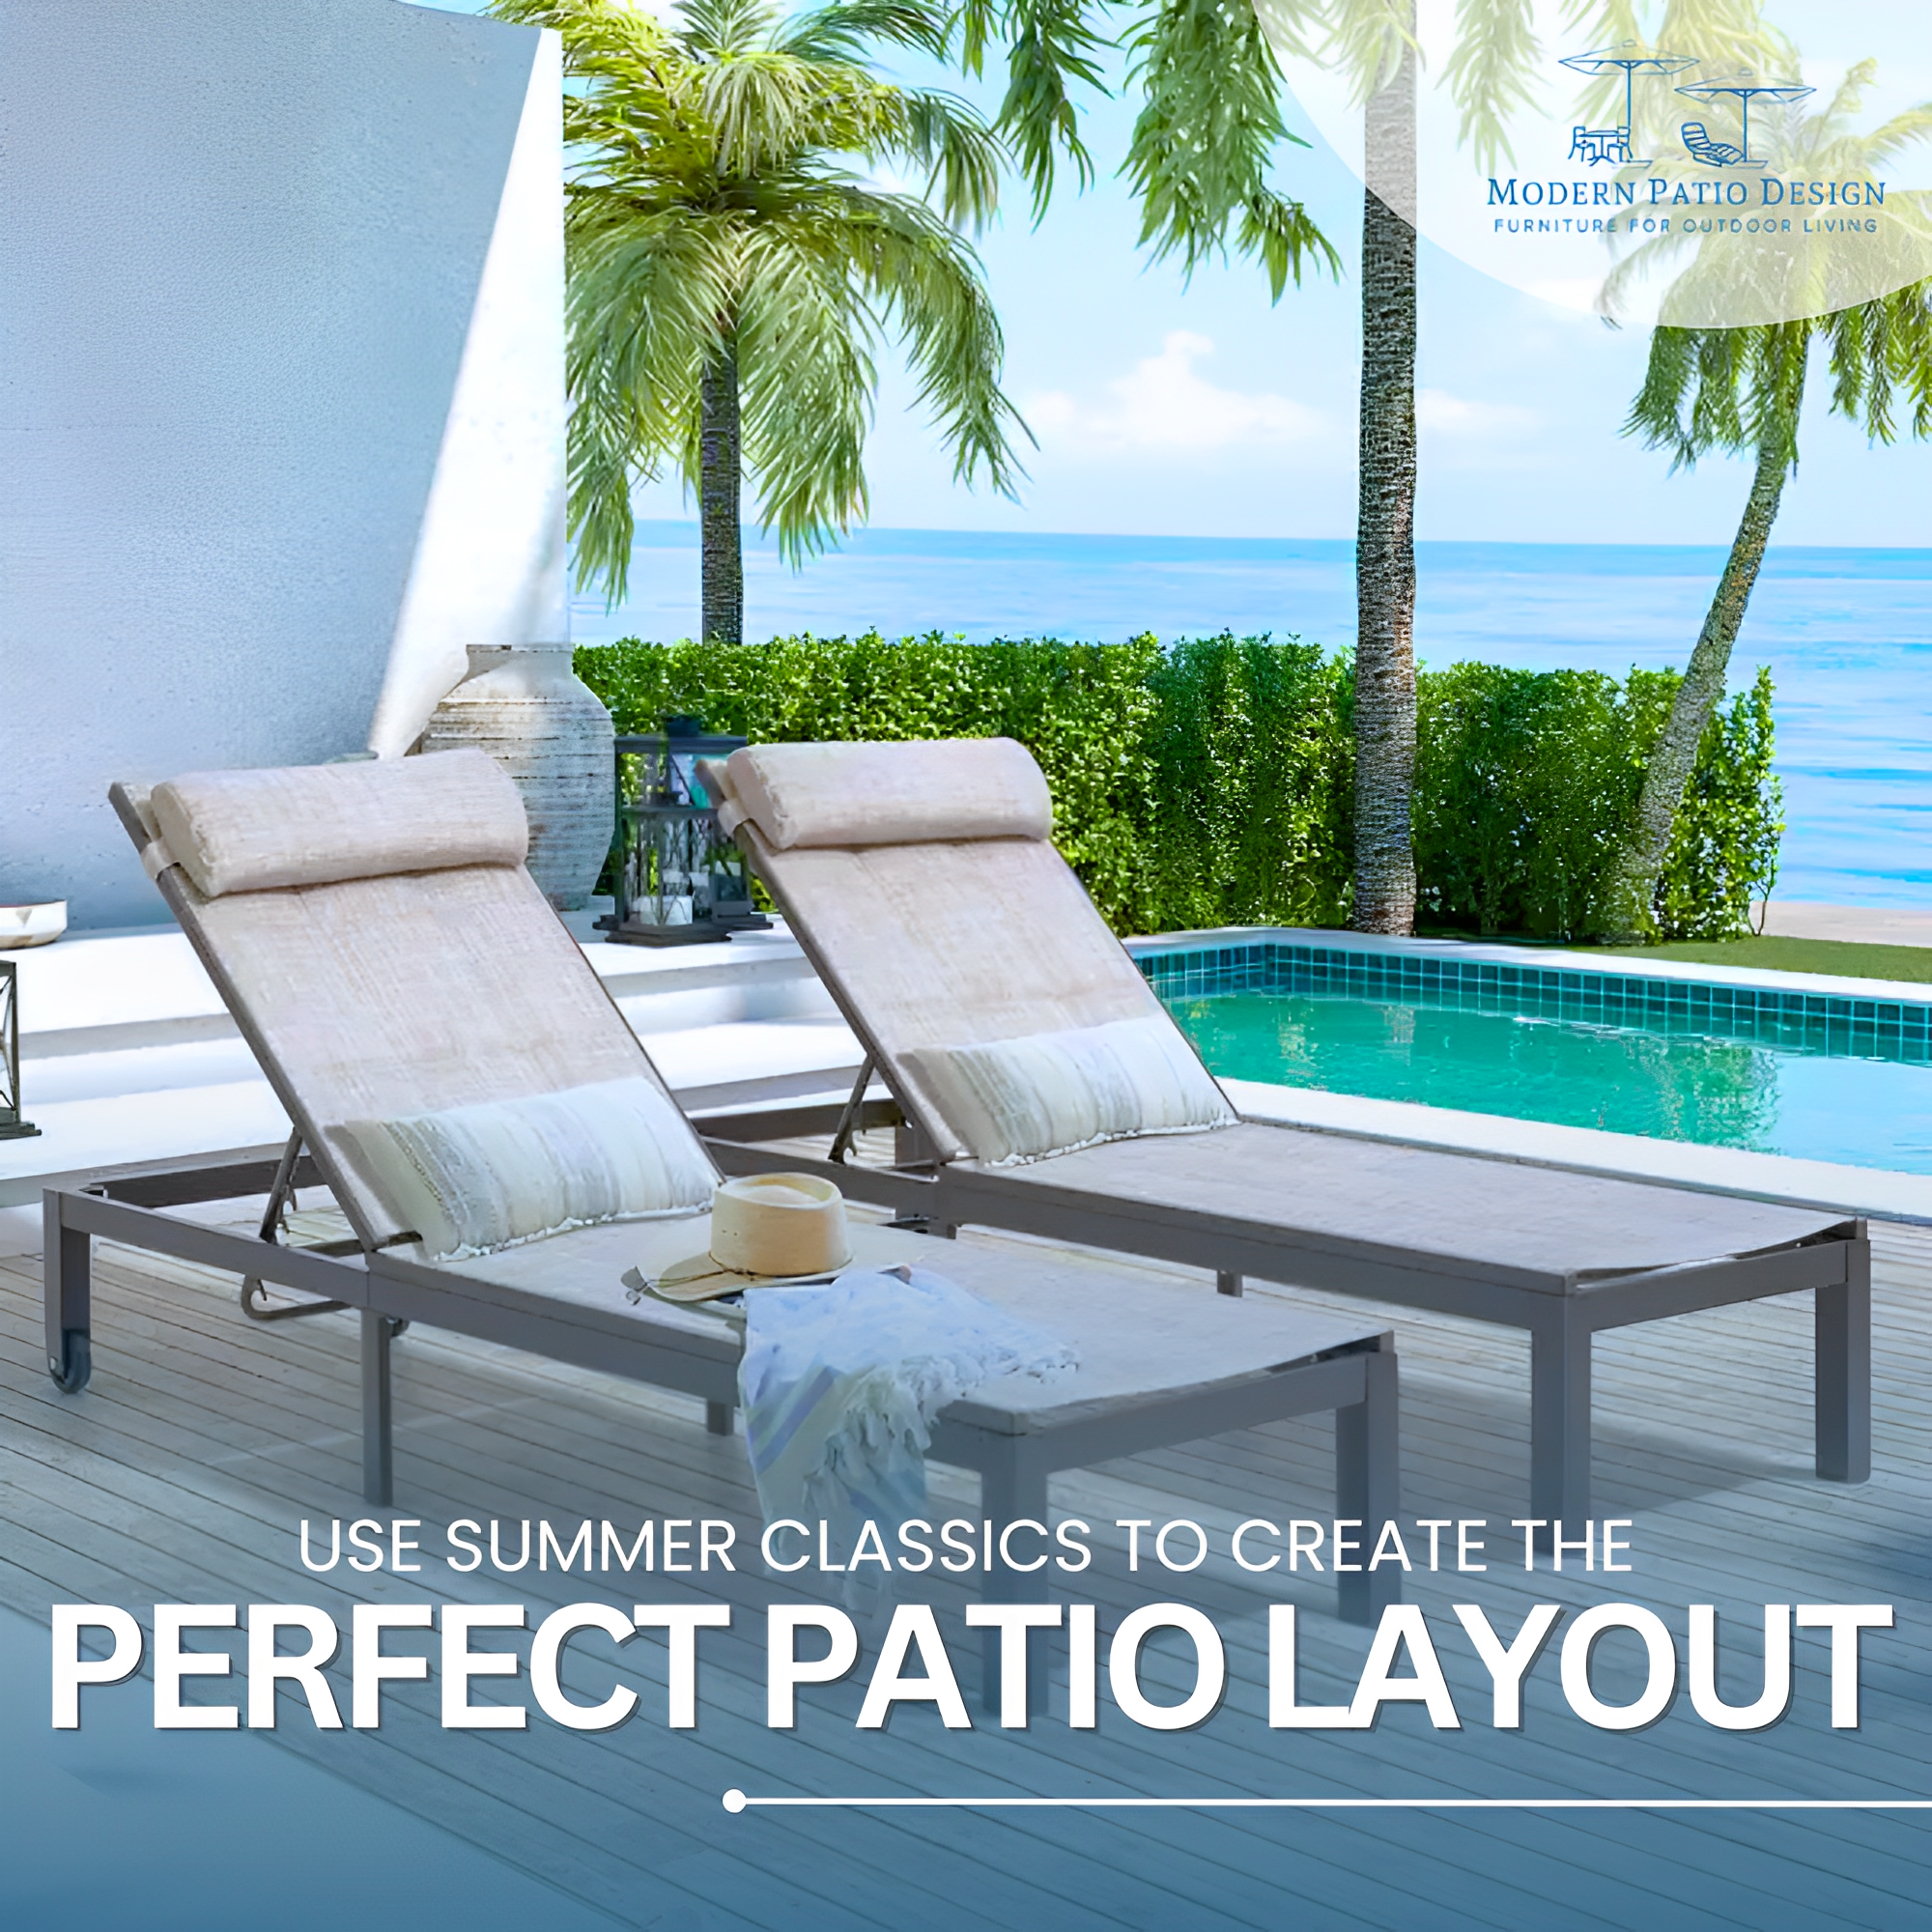 Use Summer Classics for Creating the Perfect Patio Layout